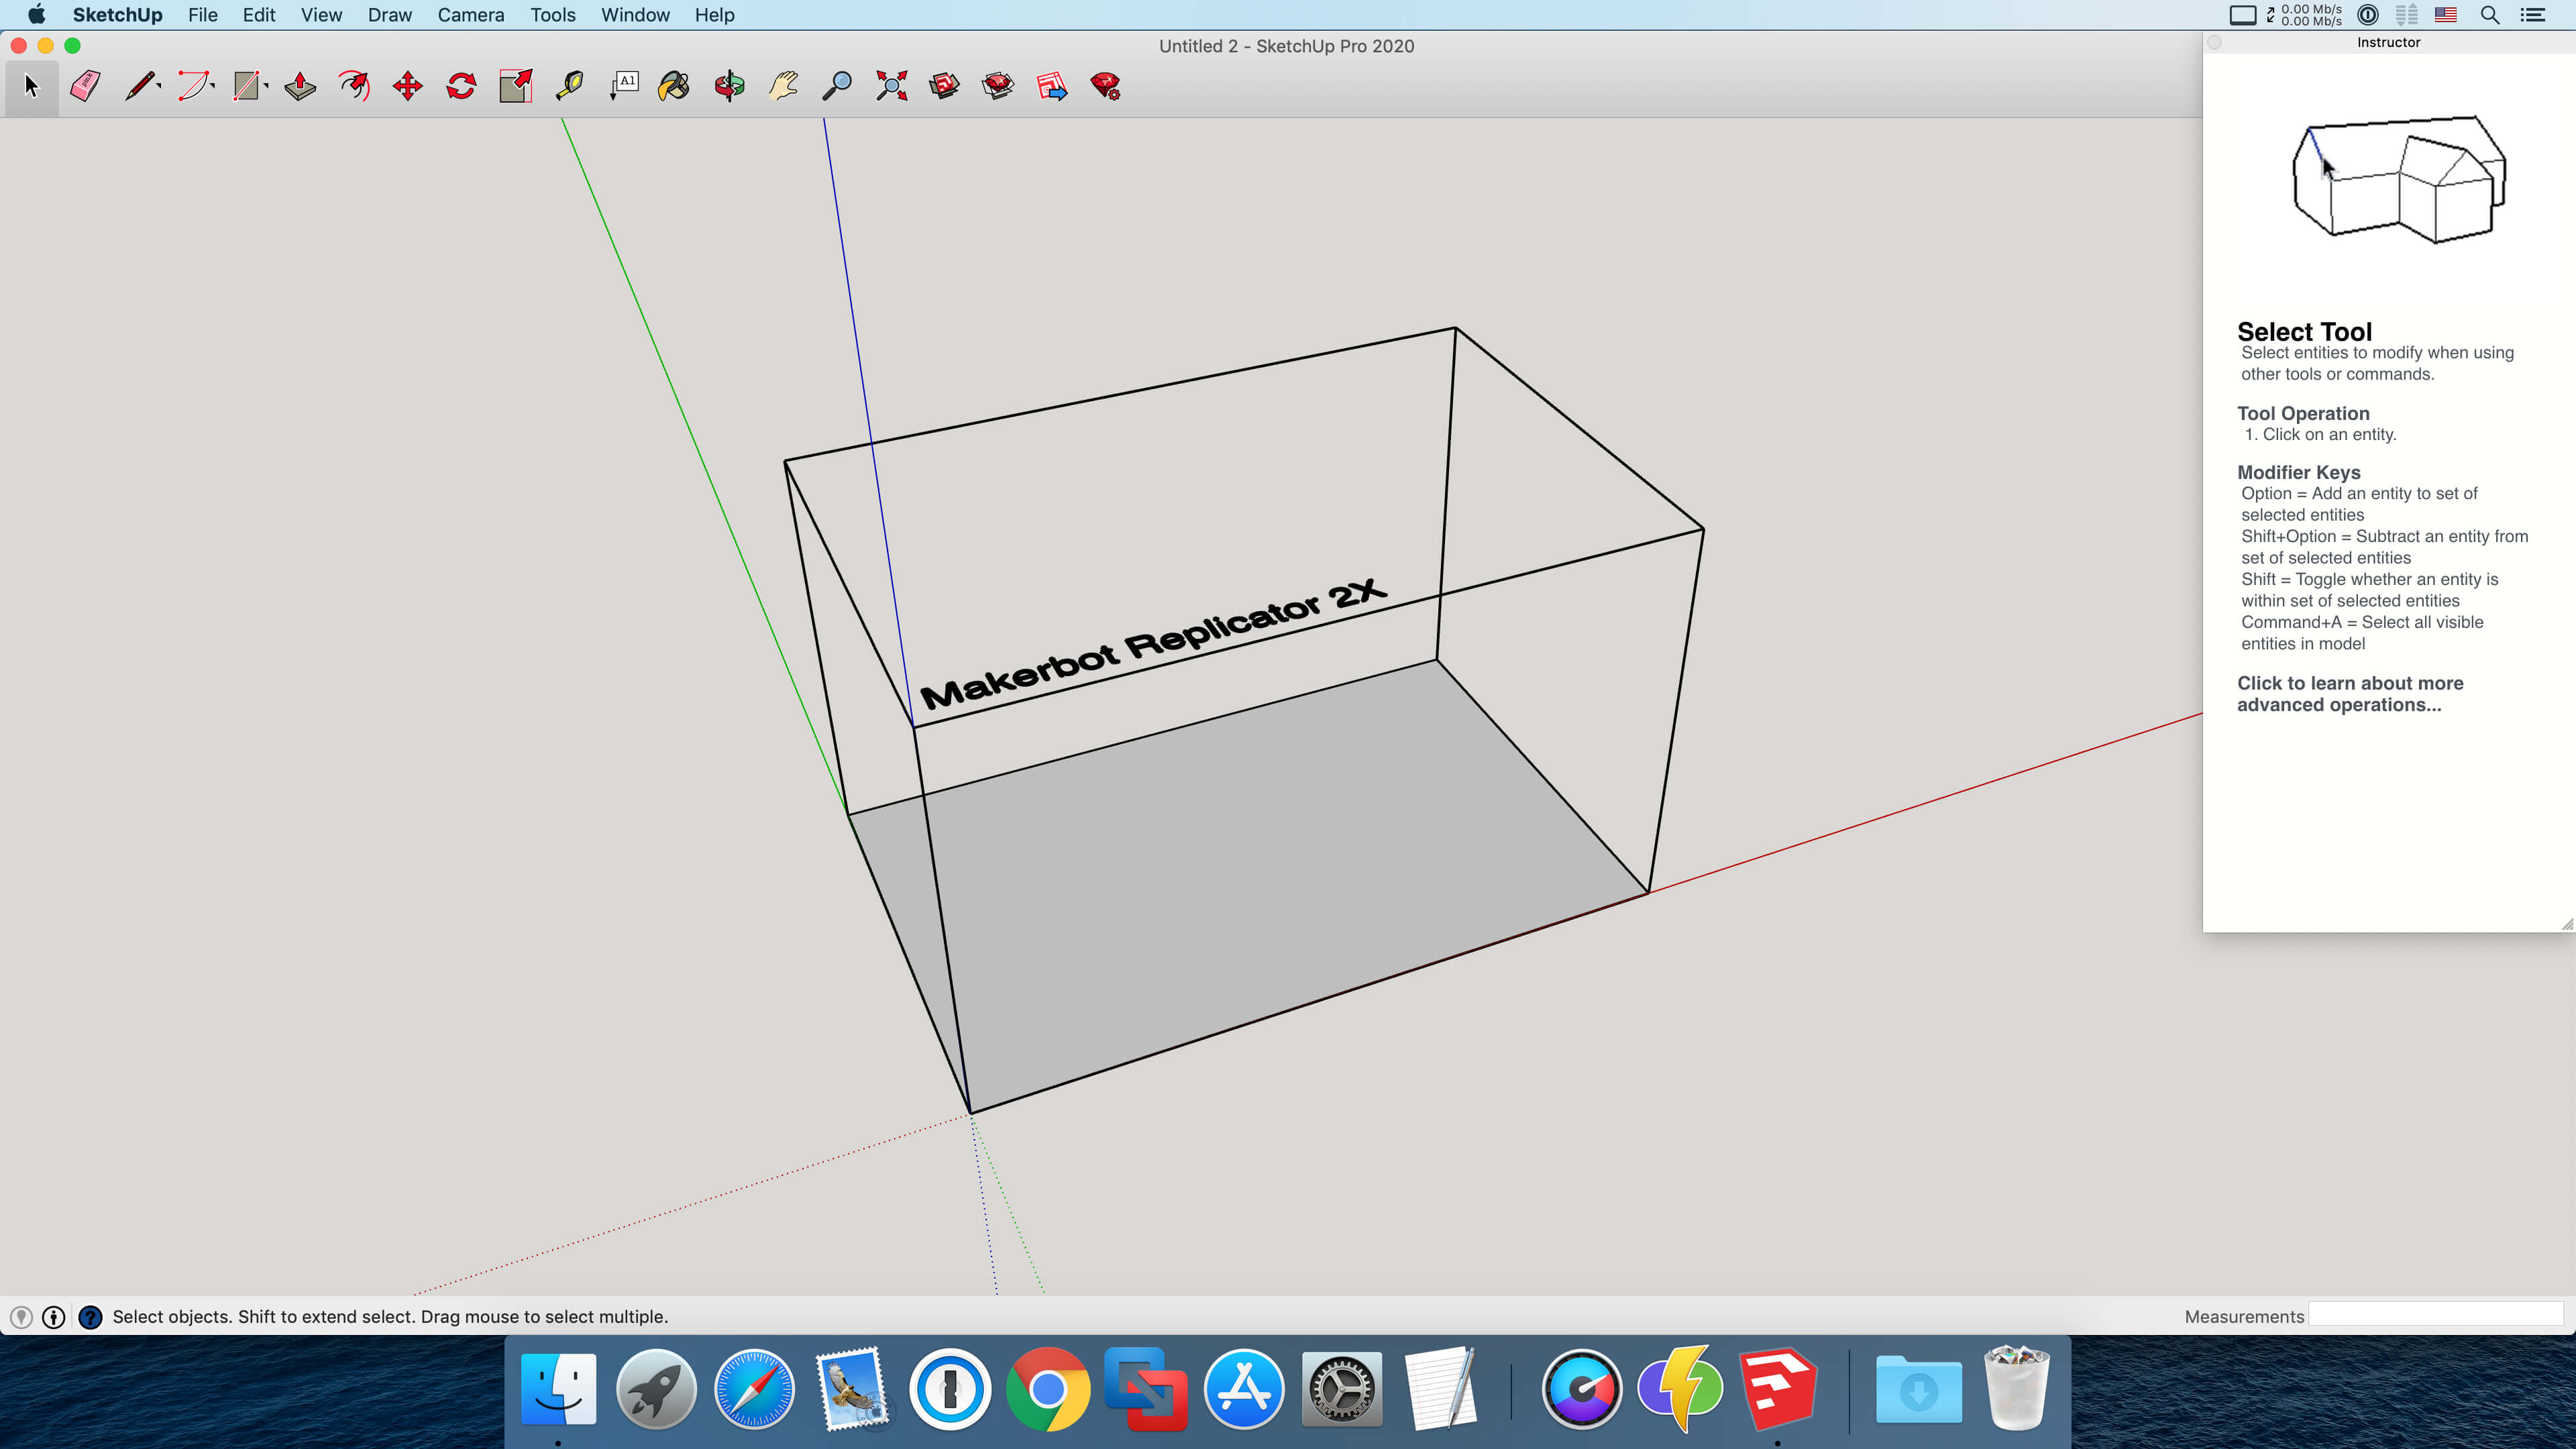 Sketchup 2020 free download full version with crack 64 bit